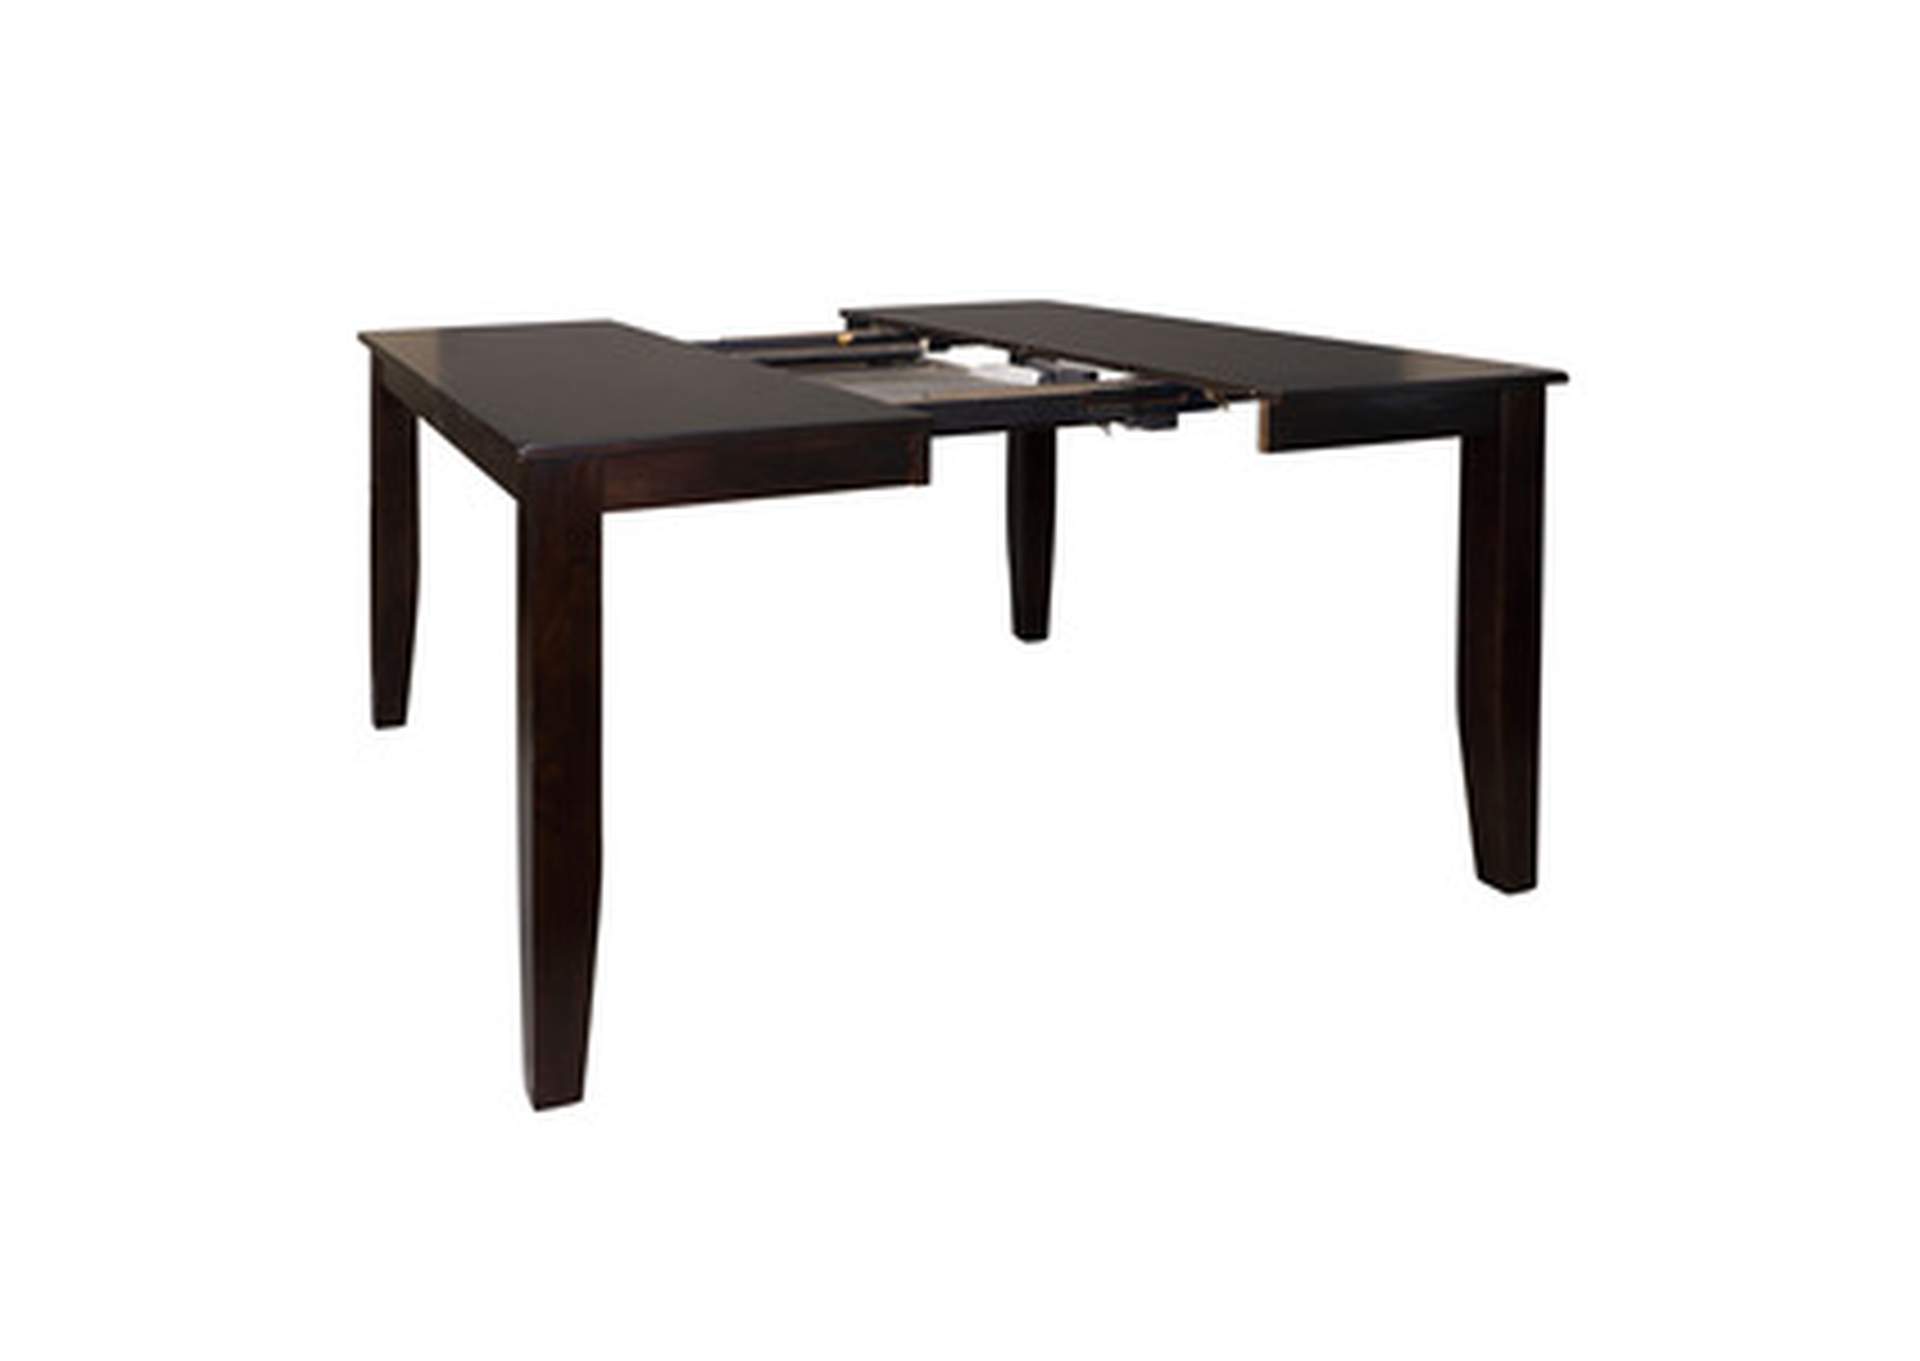 Crown Point Counter Height Table,Homelegance